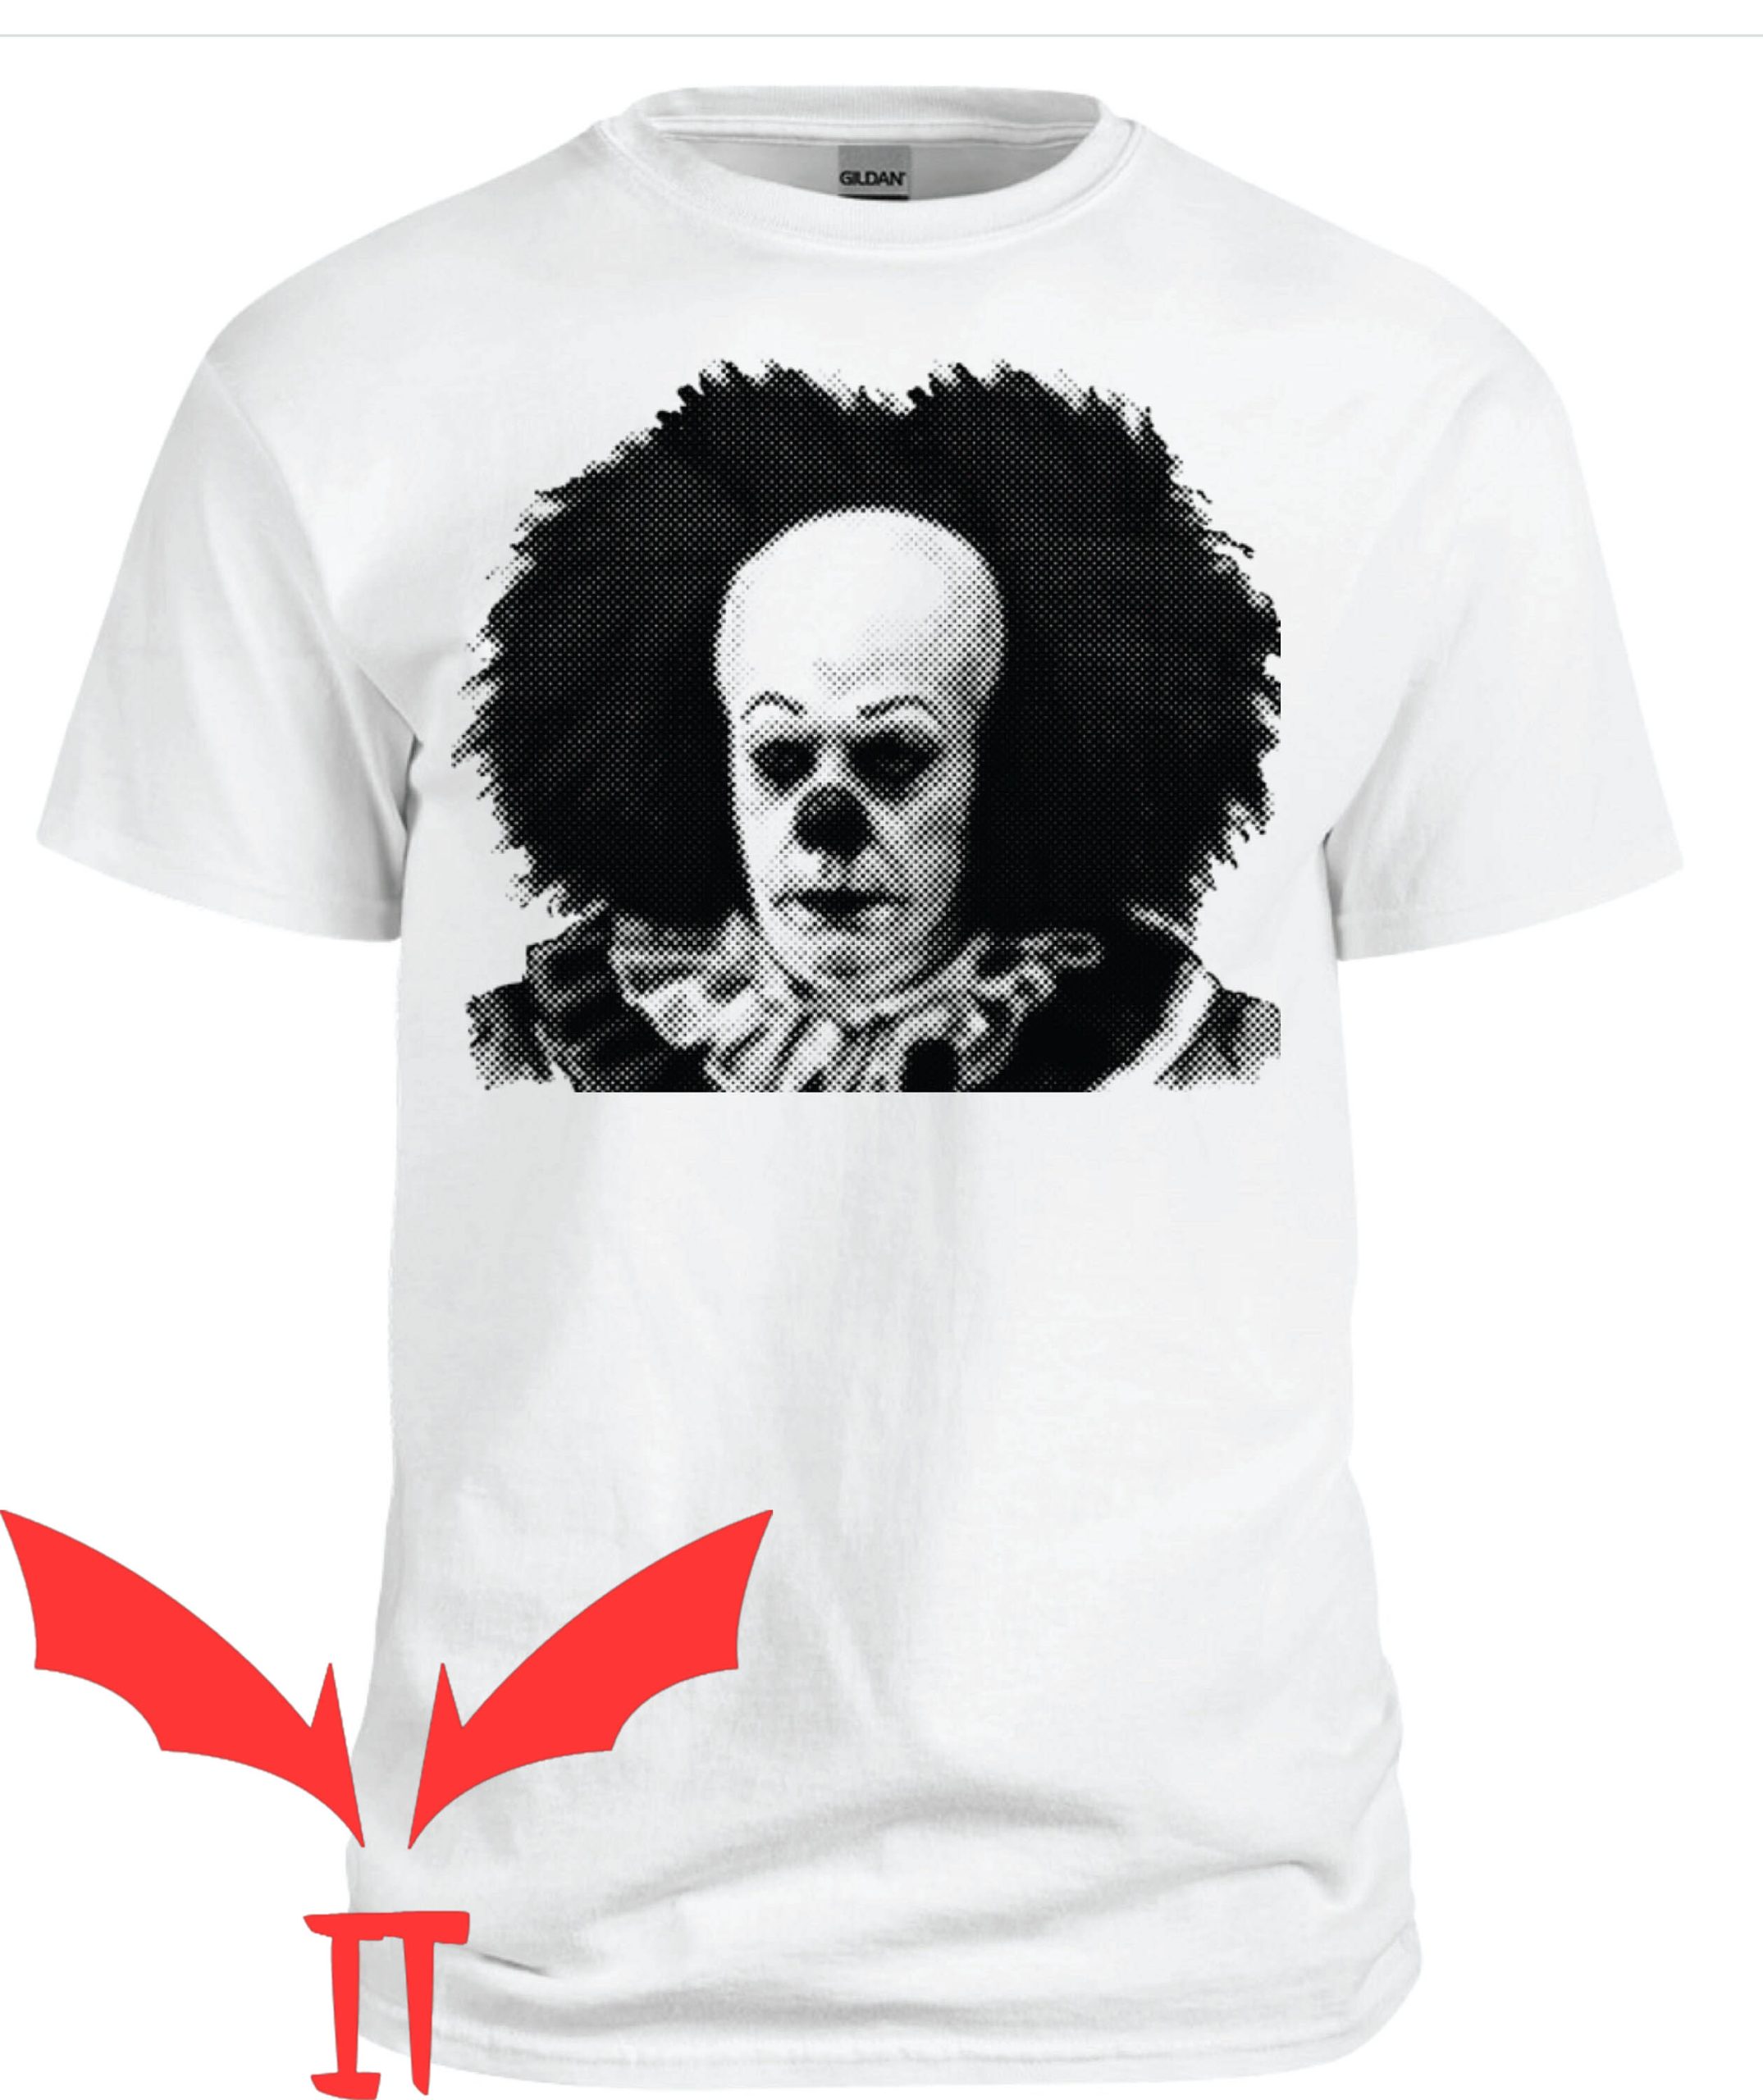 IT T-Shirt Pennywise Large Face Horror IT The Movie